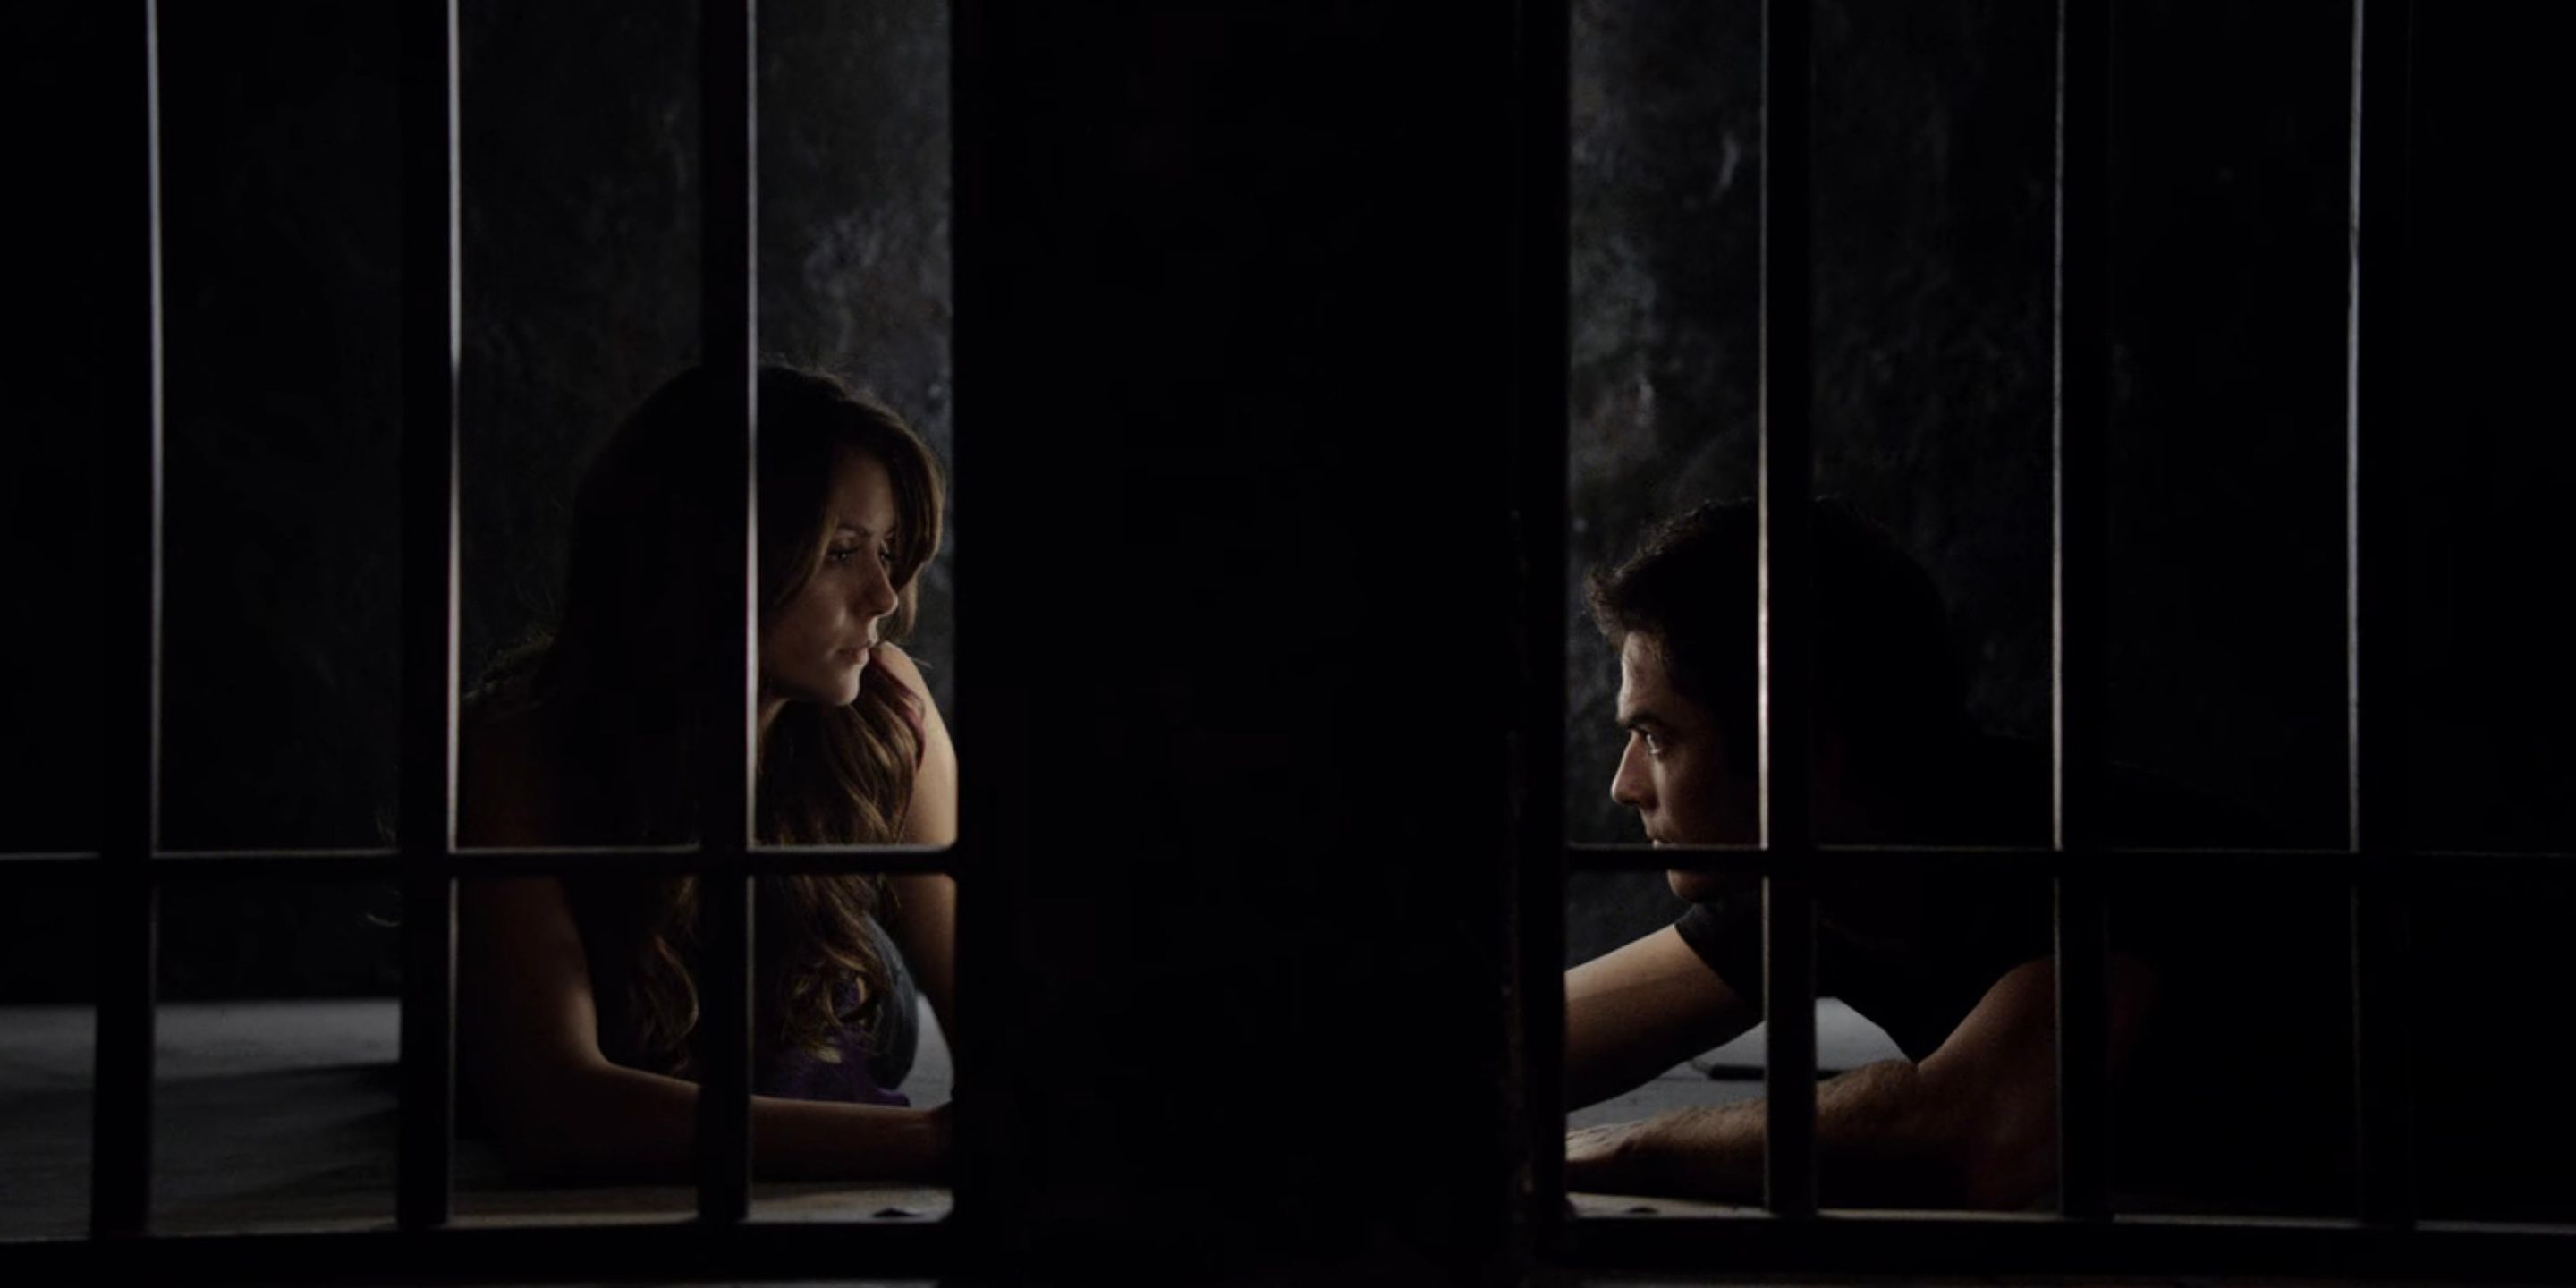 Damon and Elena trapped in The Vampire Diaries.